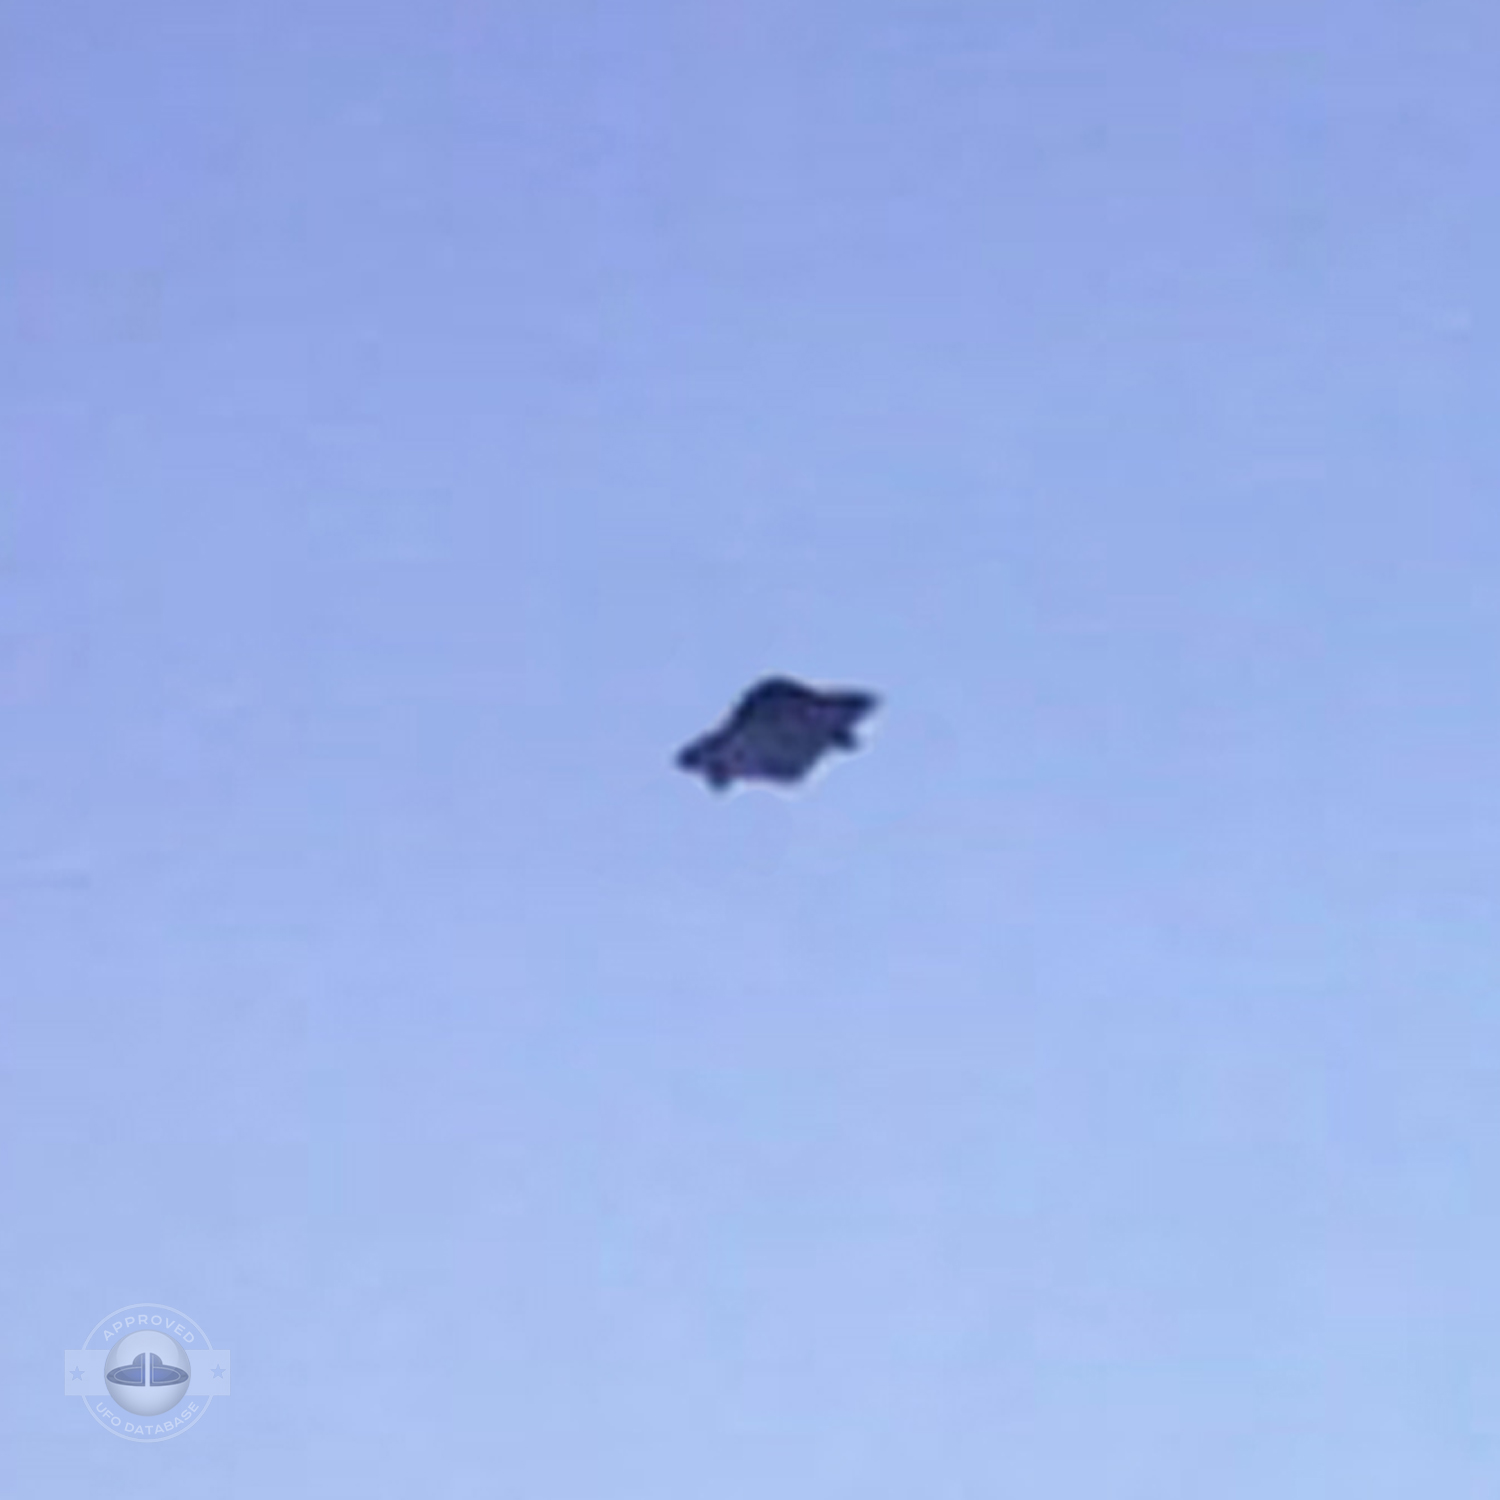 Teen student photograph incredible UFO picture | Koyang, South Korea UFO Picture #197-3